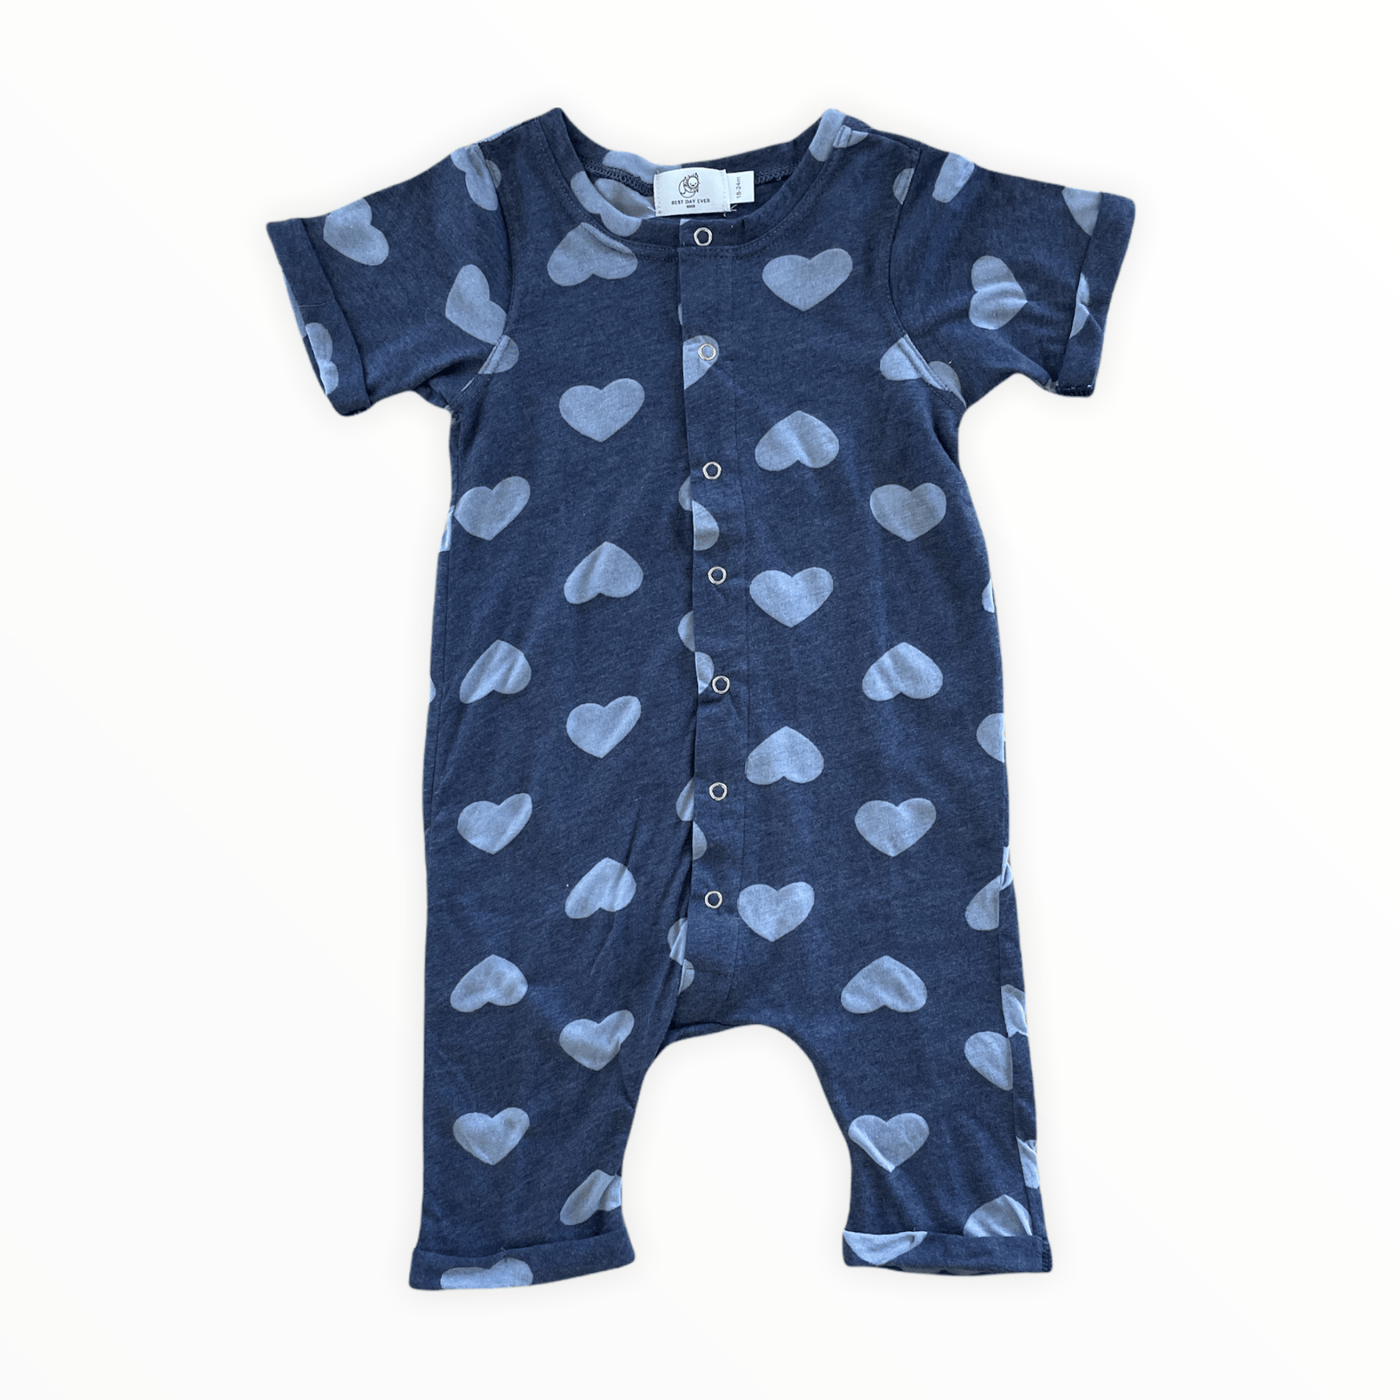 Best Day Ever Kids Baby One-Pieces Cozy Hearts Romper buy online boutique kids clothing